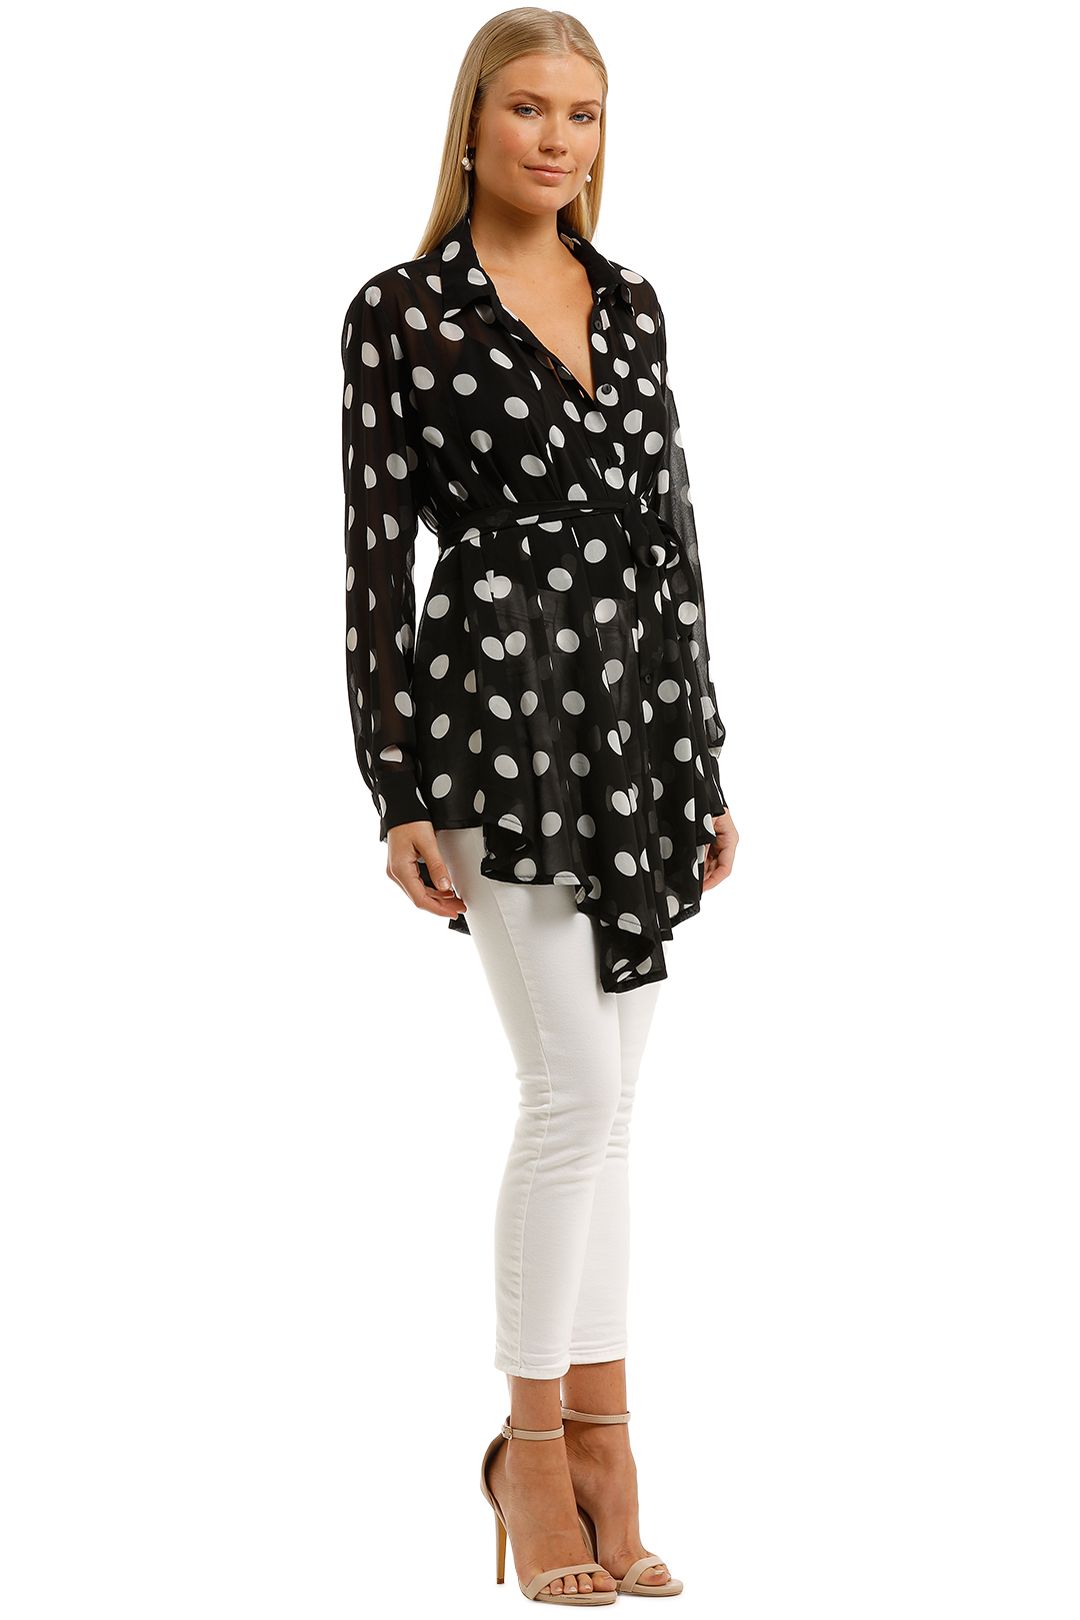 Curate-by-Trelise-Cooper-Collar-Back-Girl-Shirt-Spots-Side